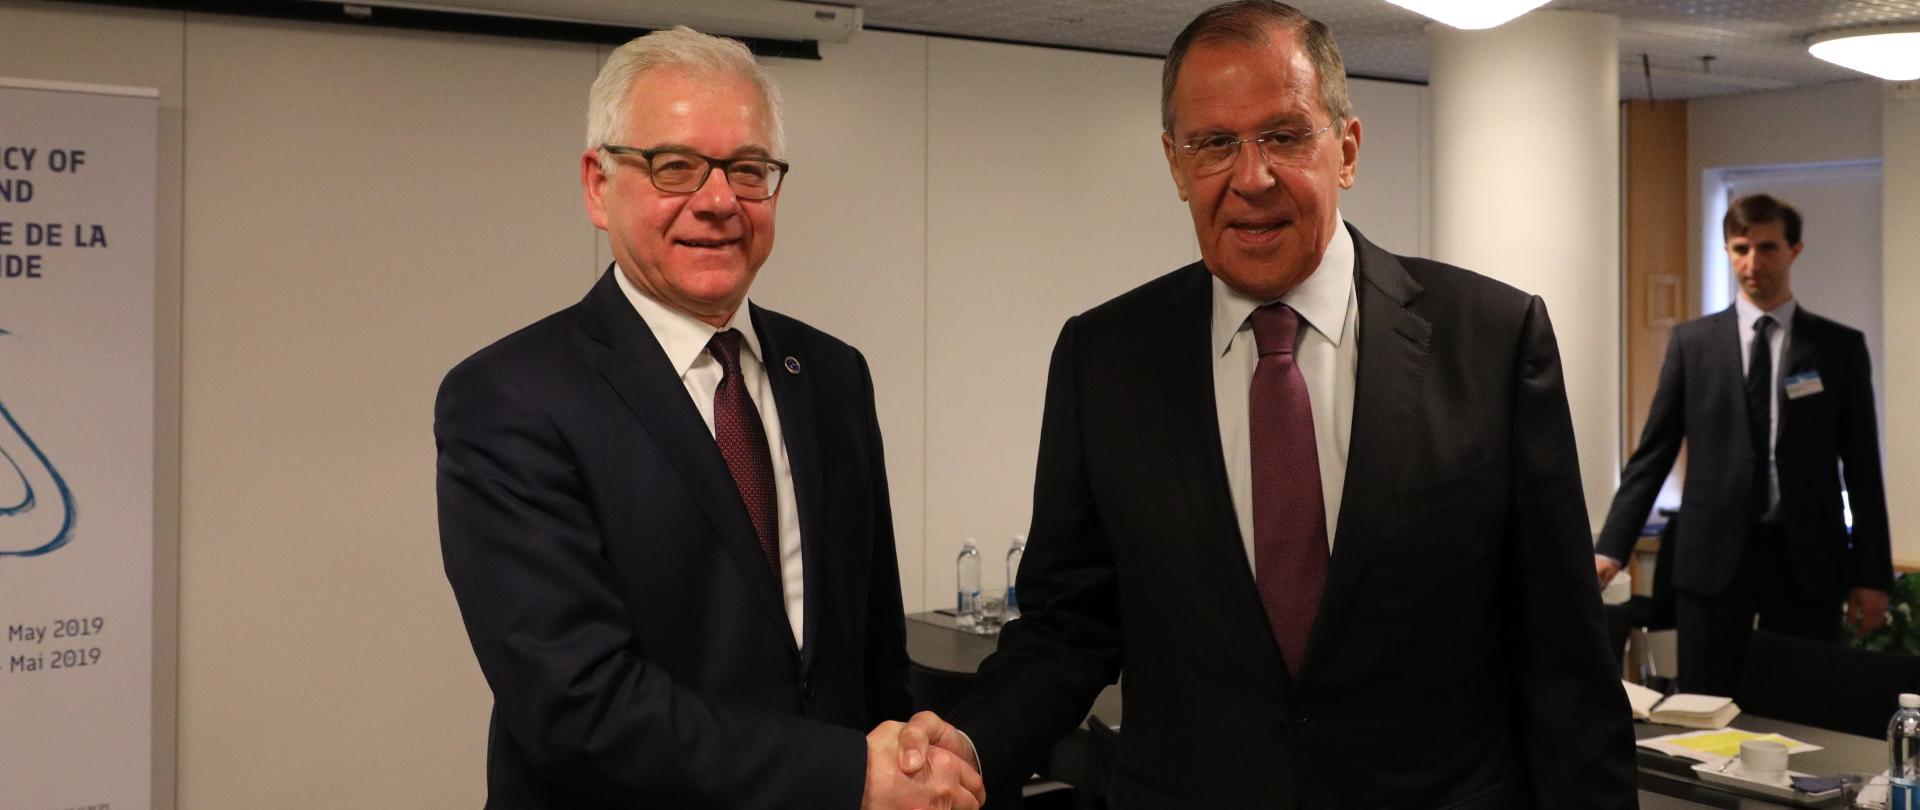 Foreign ministers of Poland and Russia meet in Helsinki